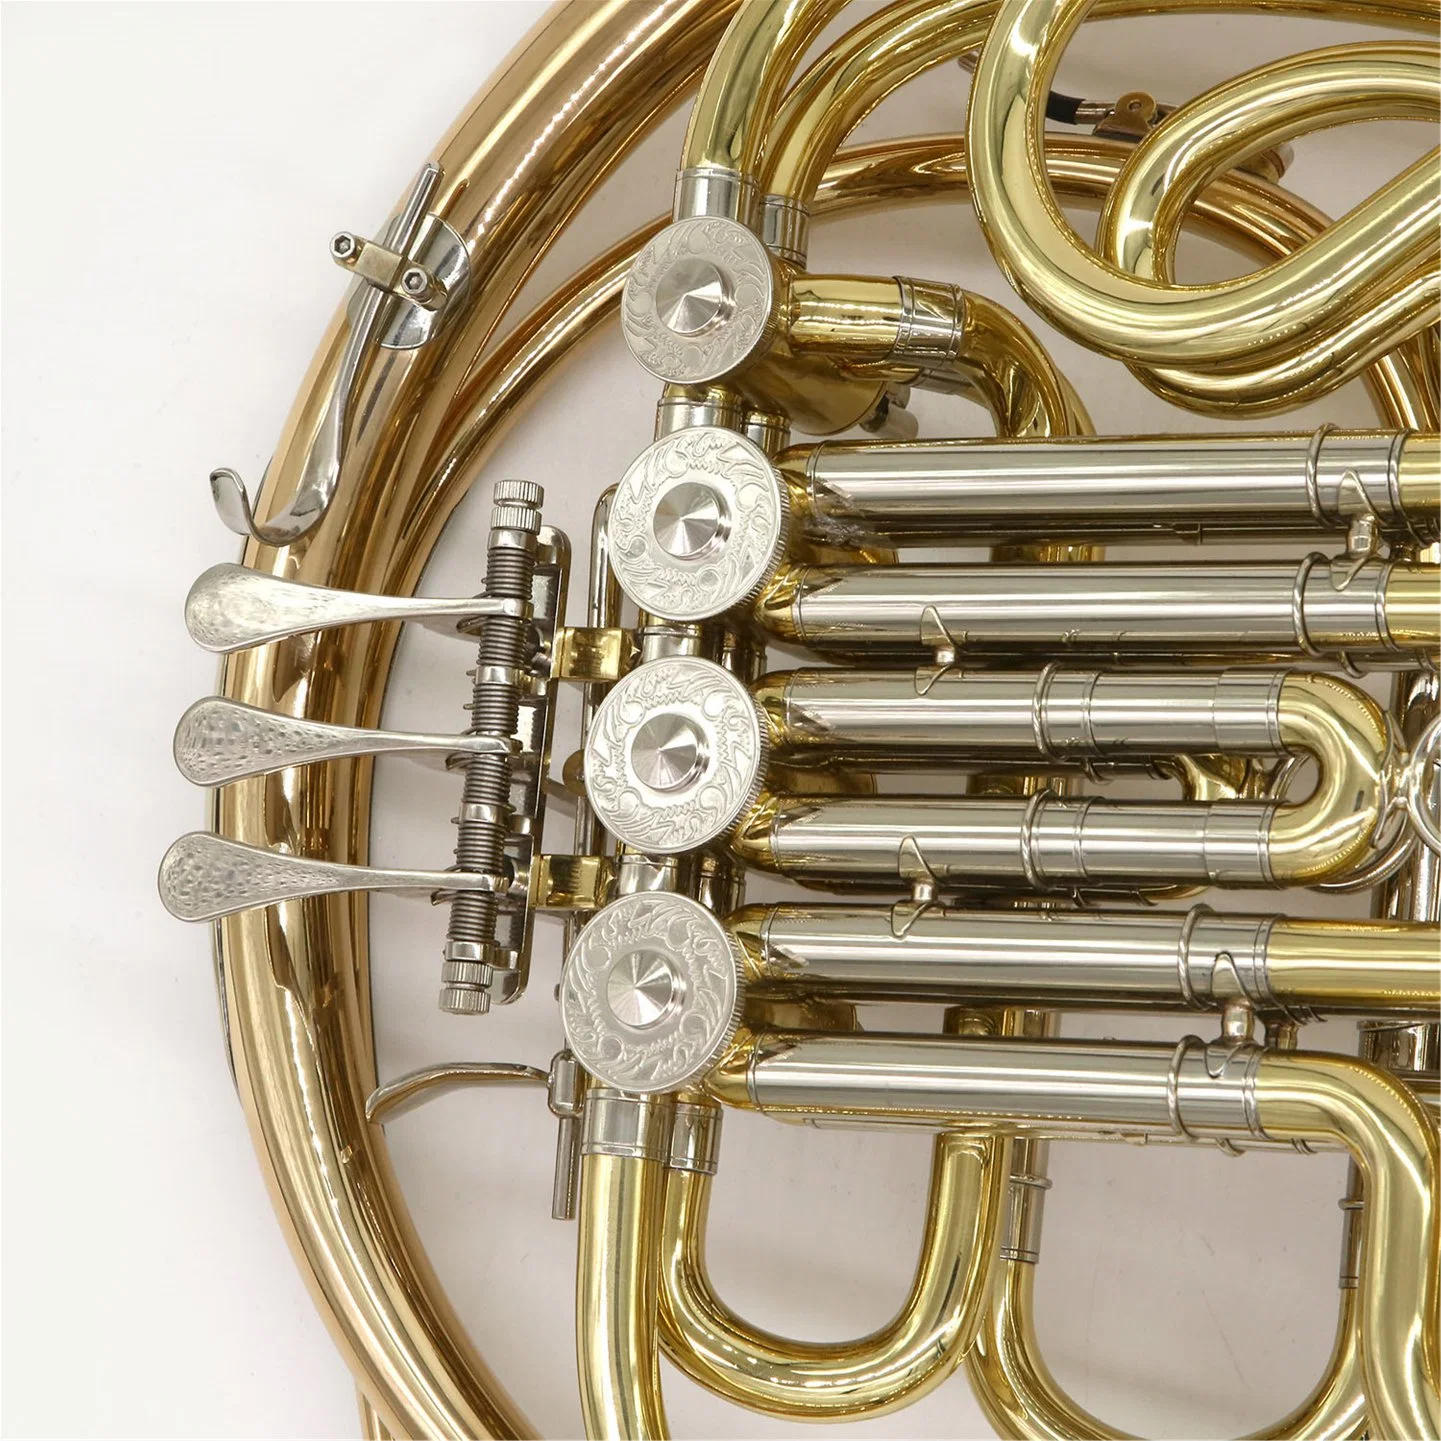 Louis French Horn, New Arrival Horns, Wholesale/Supplier Musical Instruments, Made in China